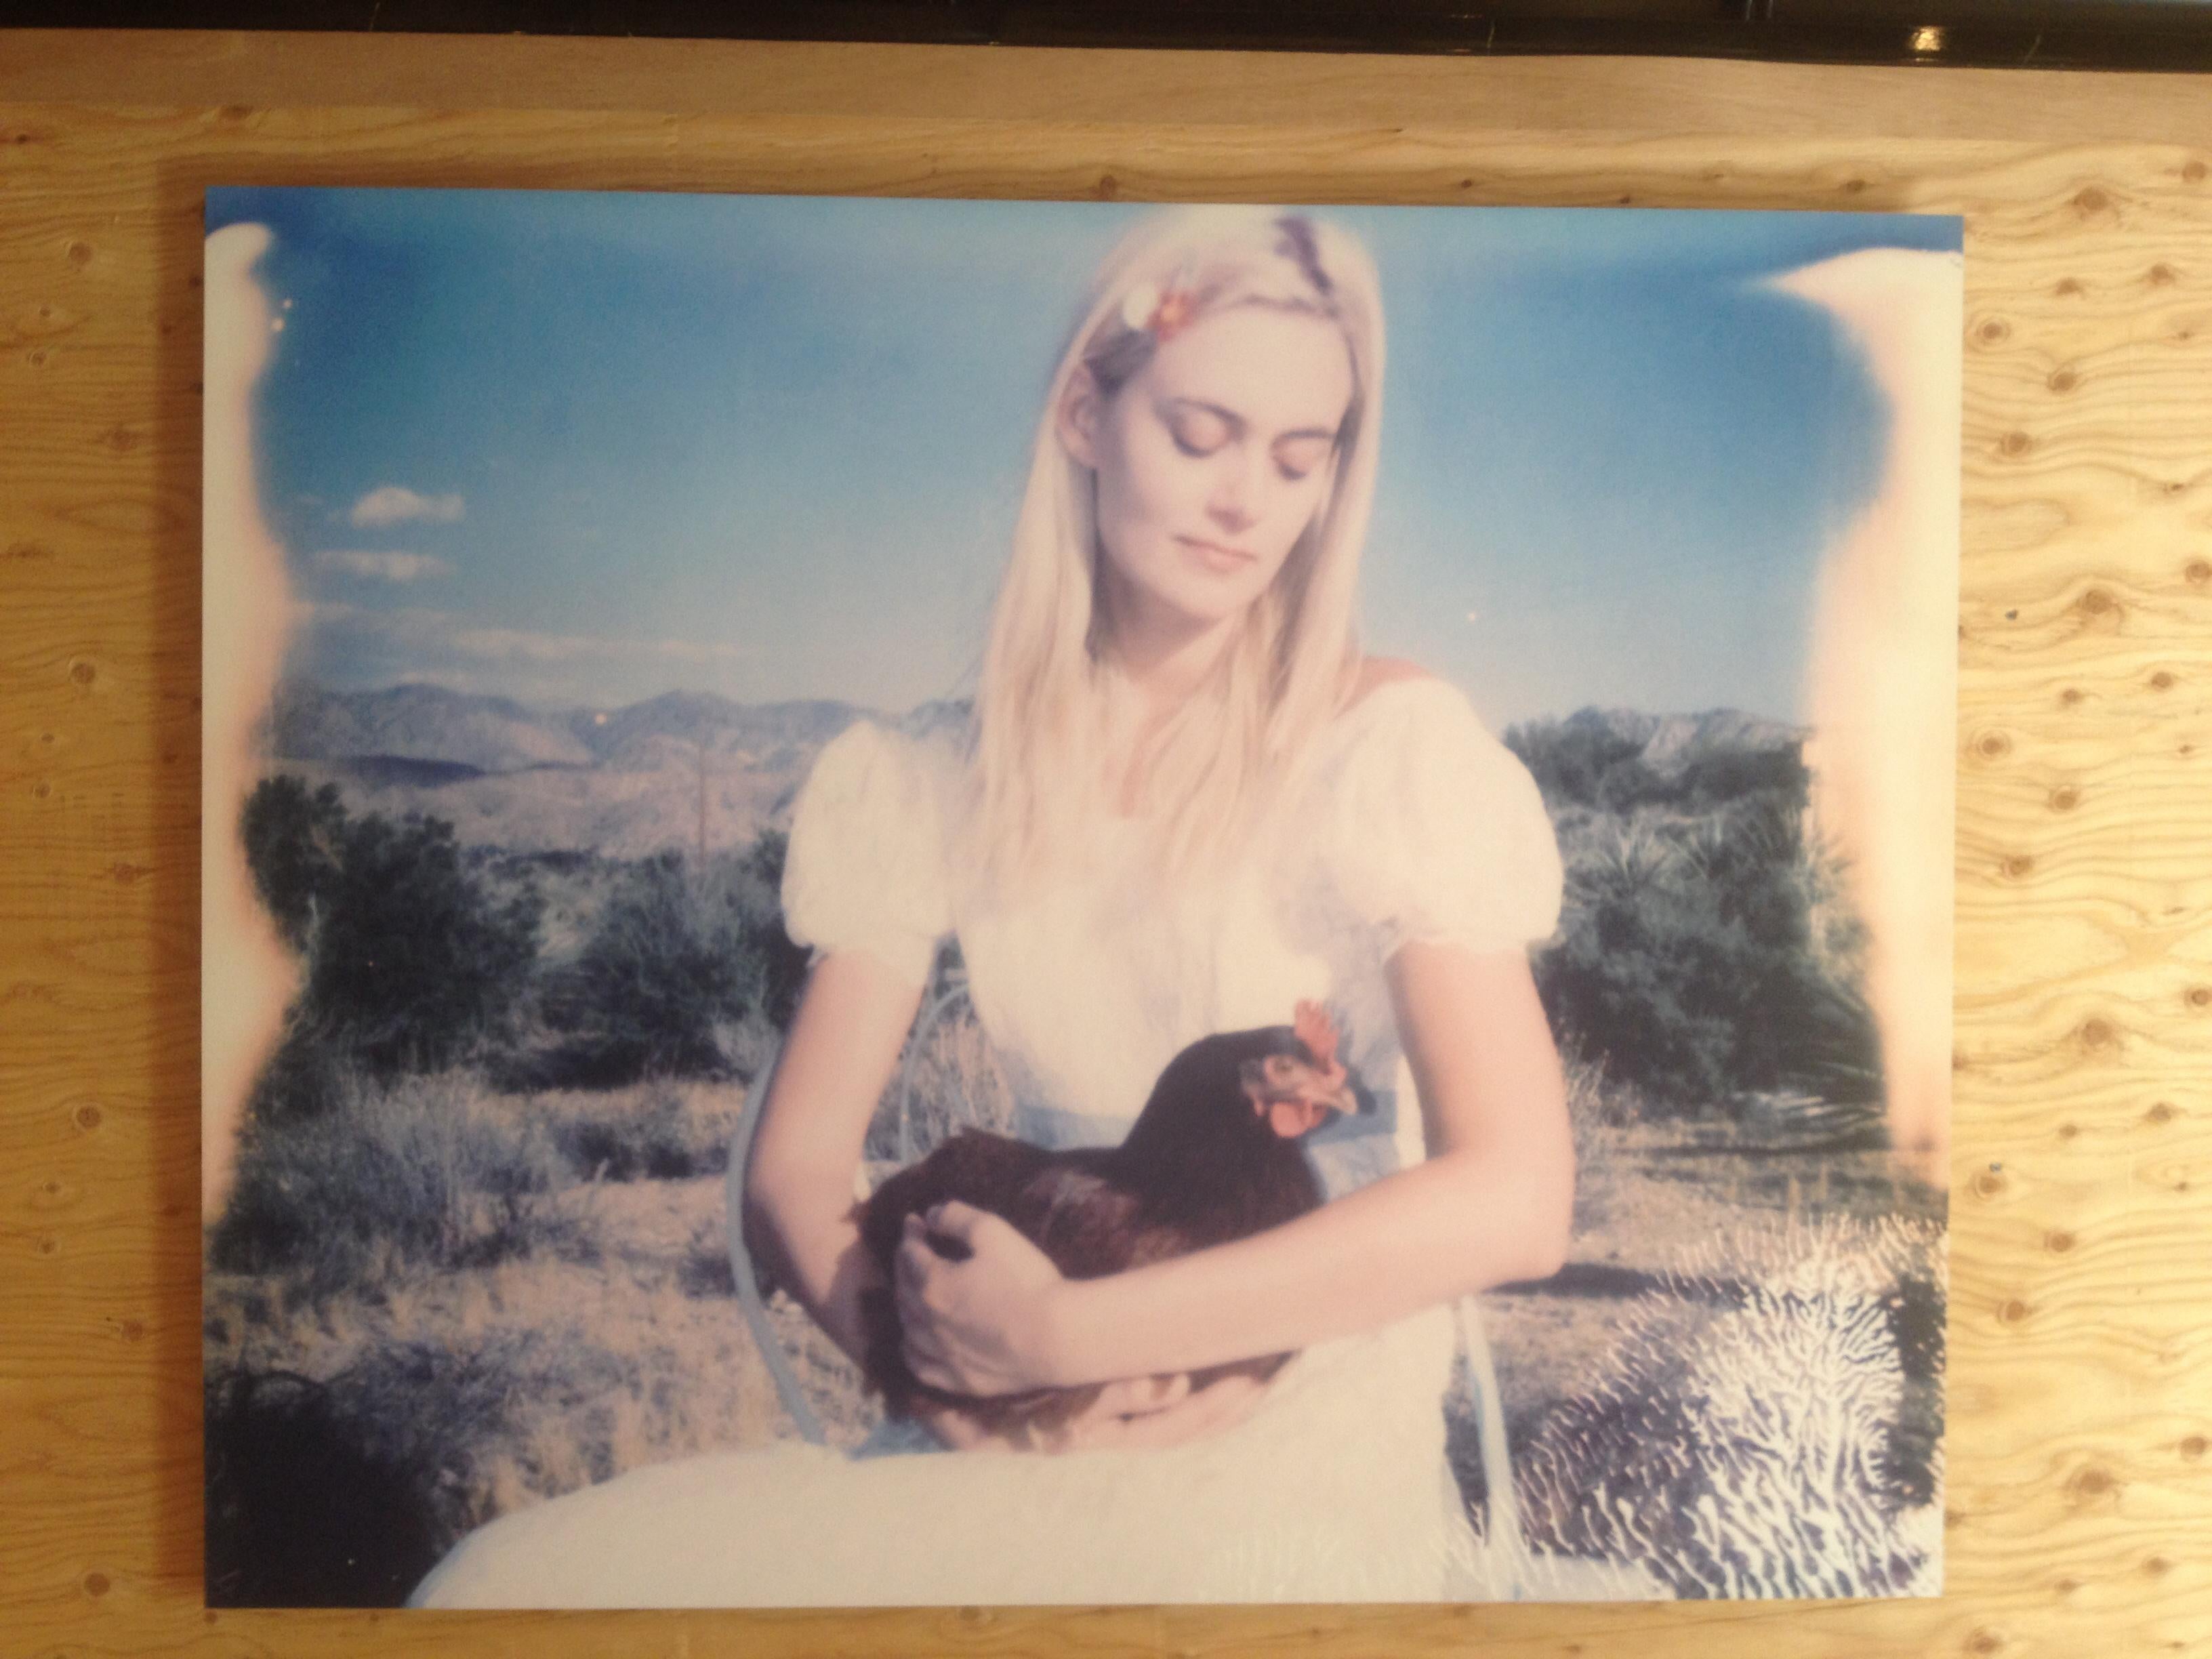 'Prince Cuckoo's Indian Dream' - 2017
(Chicks and Chicks and sometimes Cocks)

Edition of 10, 
20x24cm, 
archival C-Print, based on a Polaroid. 
Artist inventory 20022. 
Not mounted. 

Bombay Beach Biennale 2018, permanent Installation
See